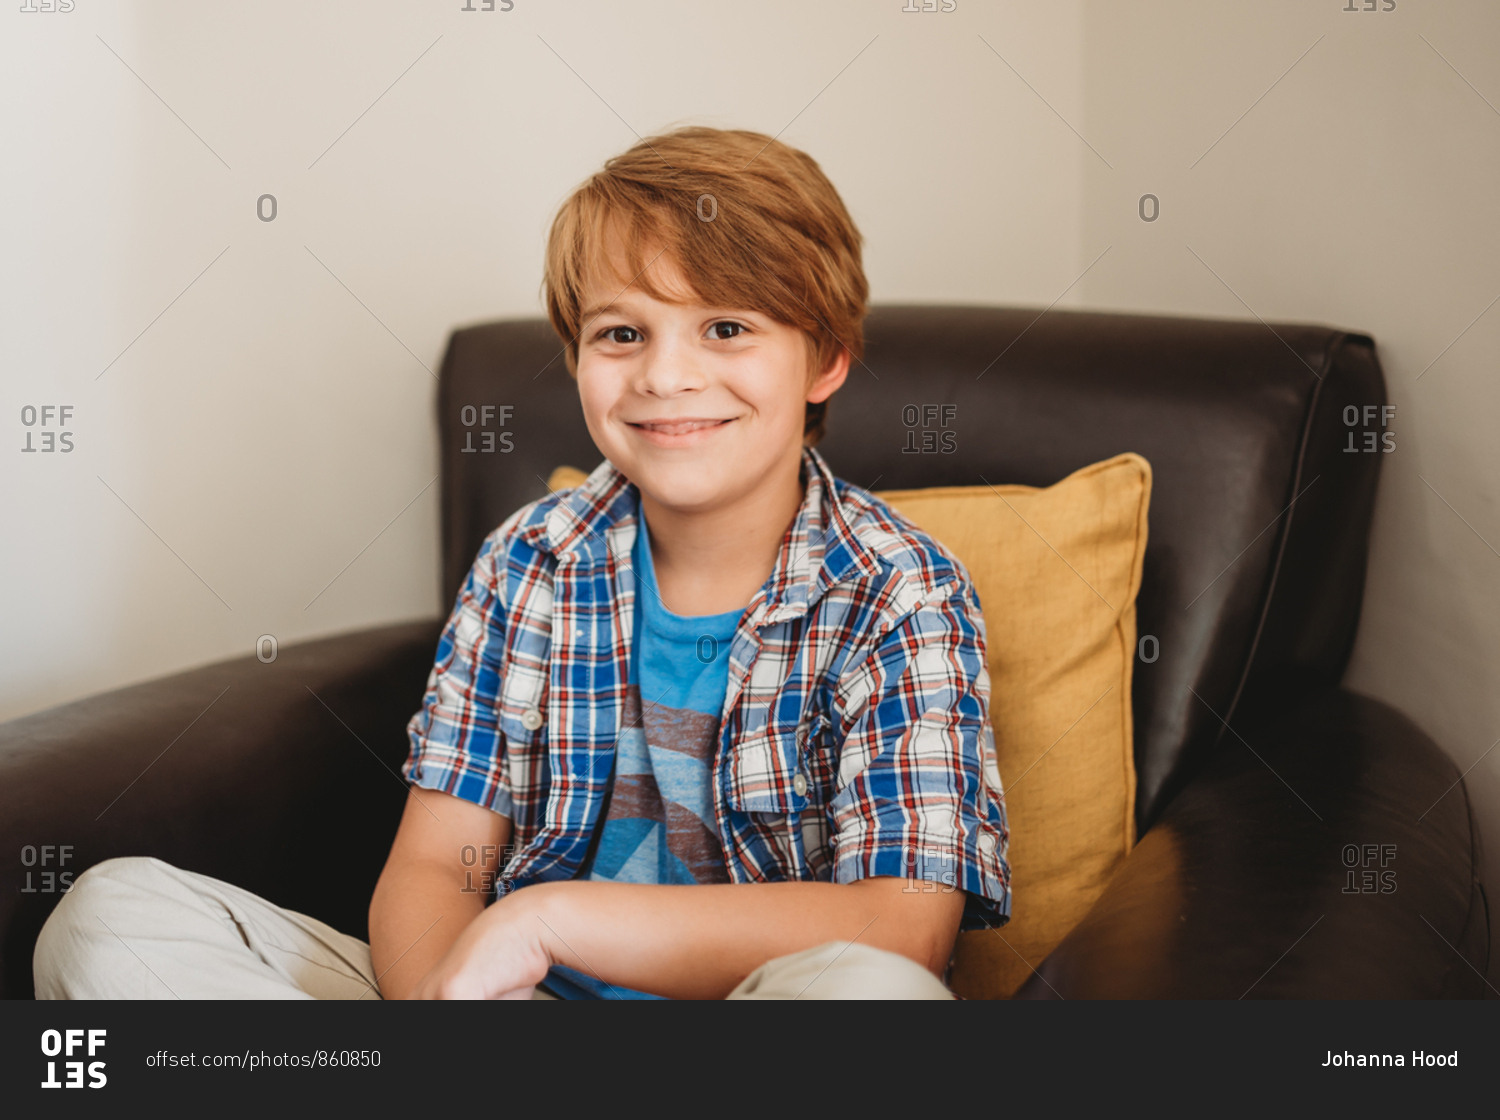 Portrait of a little boy with red hair and brown eyes sitting on brown  leather chair stock photo - OFFSET